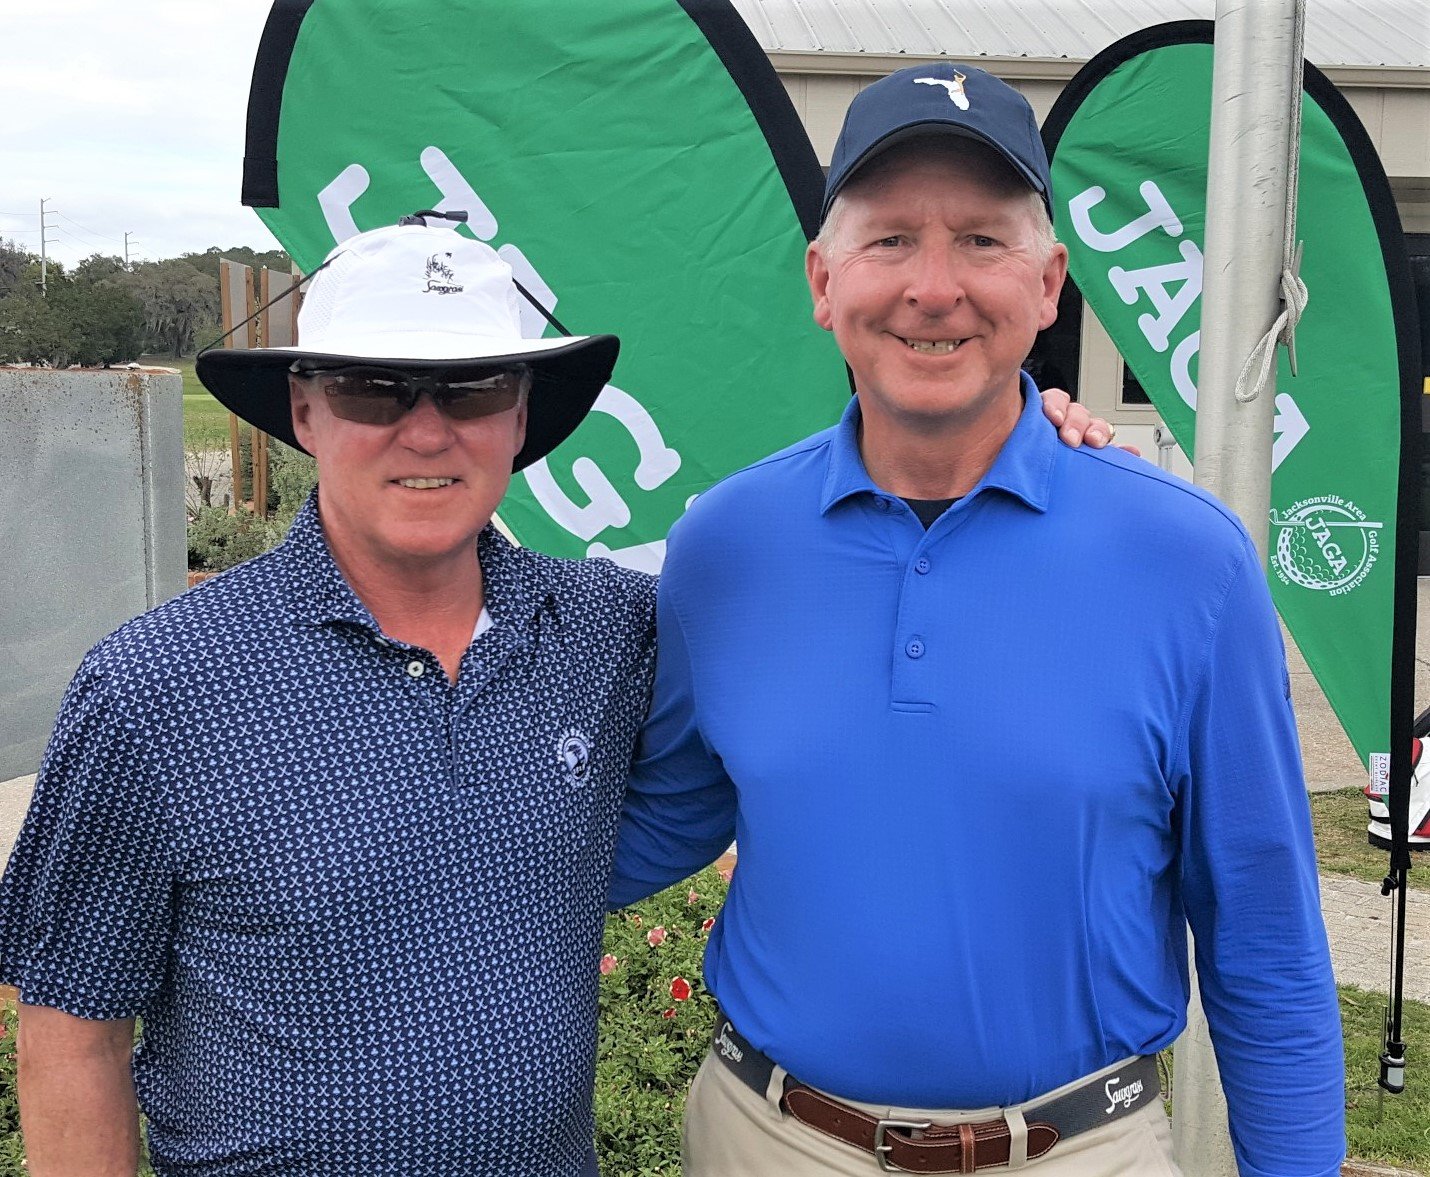 A pair of U.S. Naval Academy graduates and Sawgrass Country Club members, Jeff Johnstone and Joe Cronauer, won the net competition at the 2022 JAGA Spring Four-Ball Championship March 14.